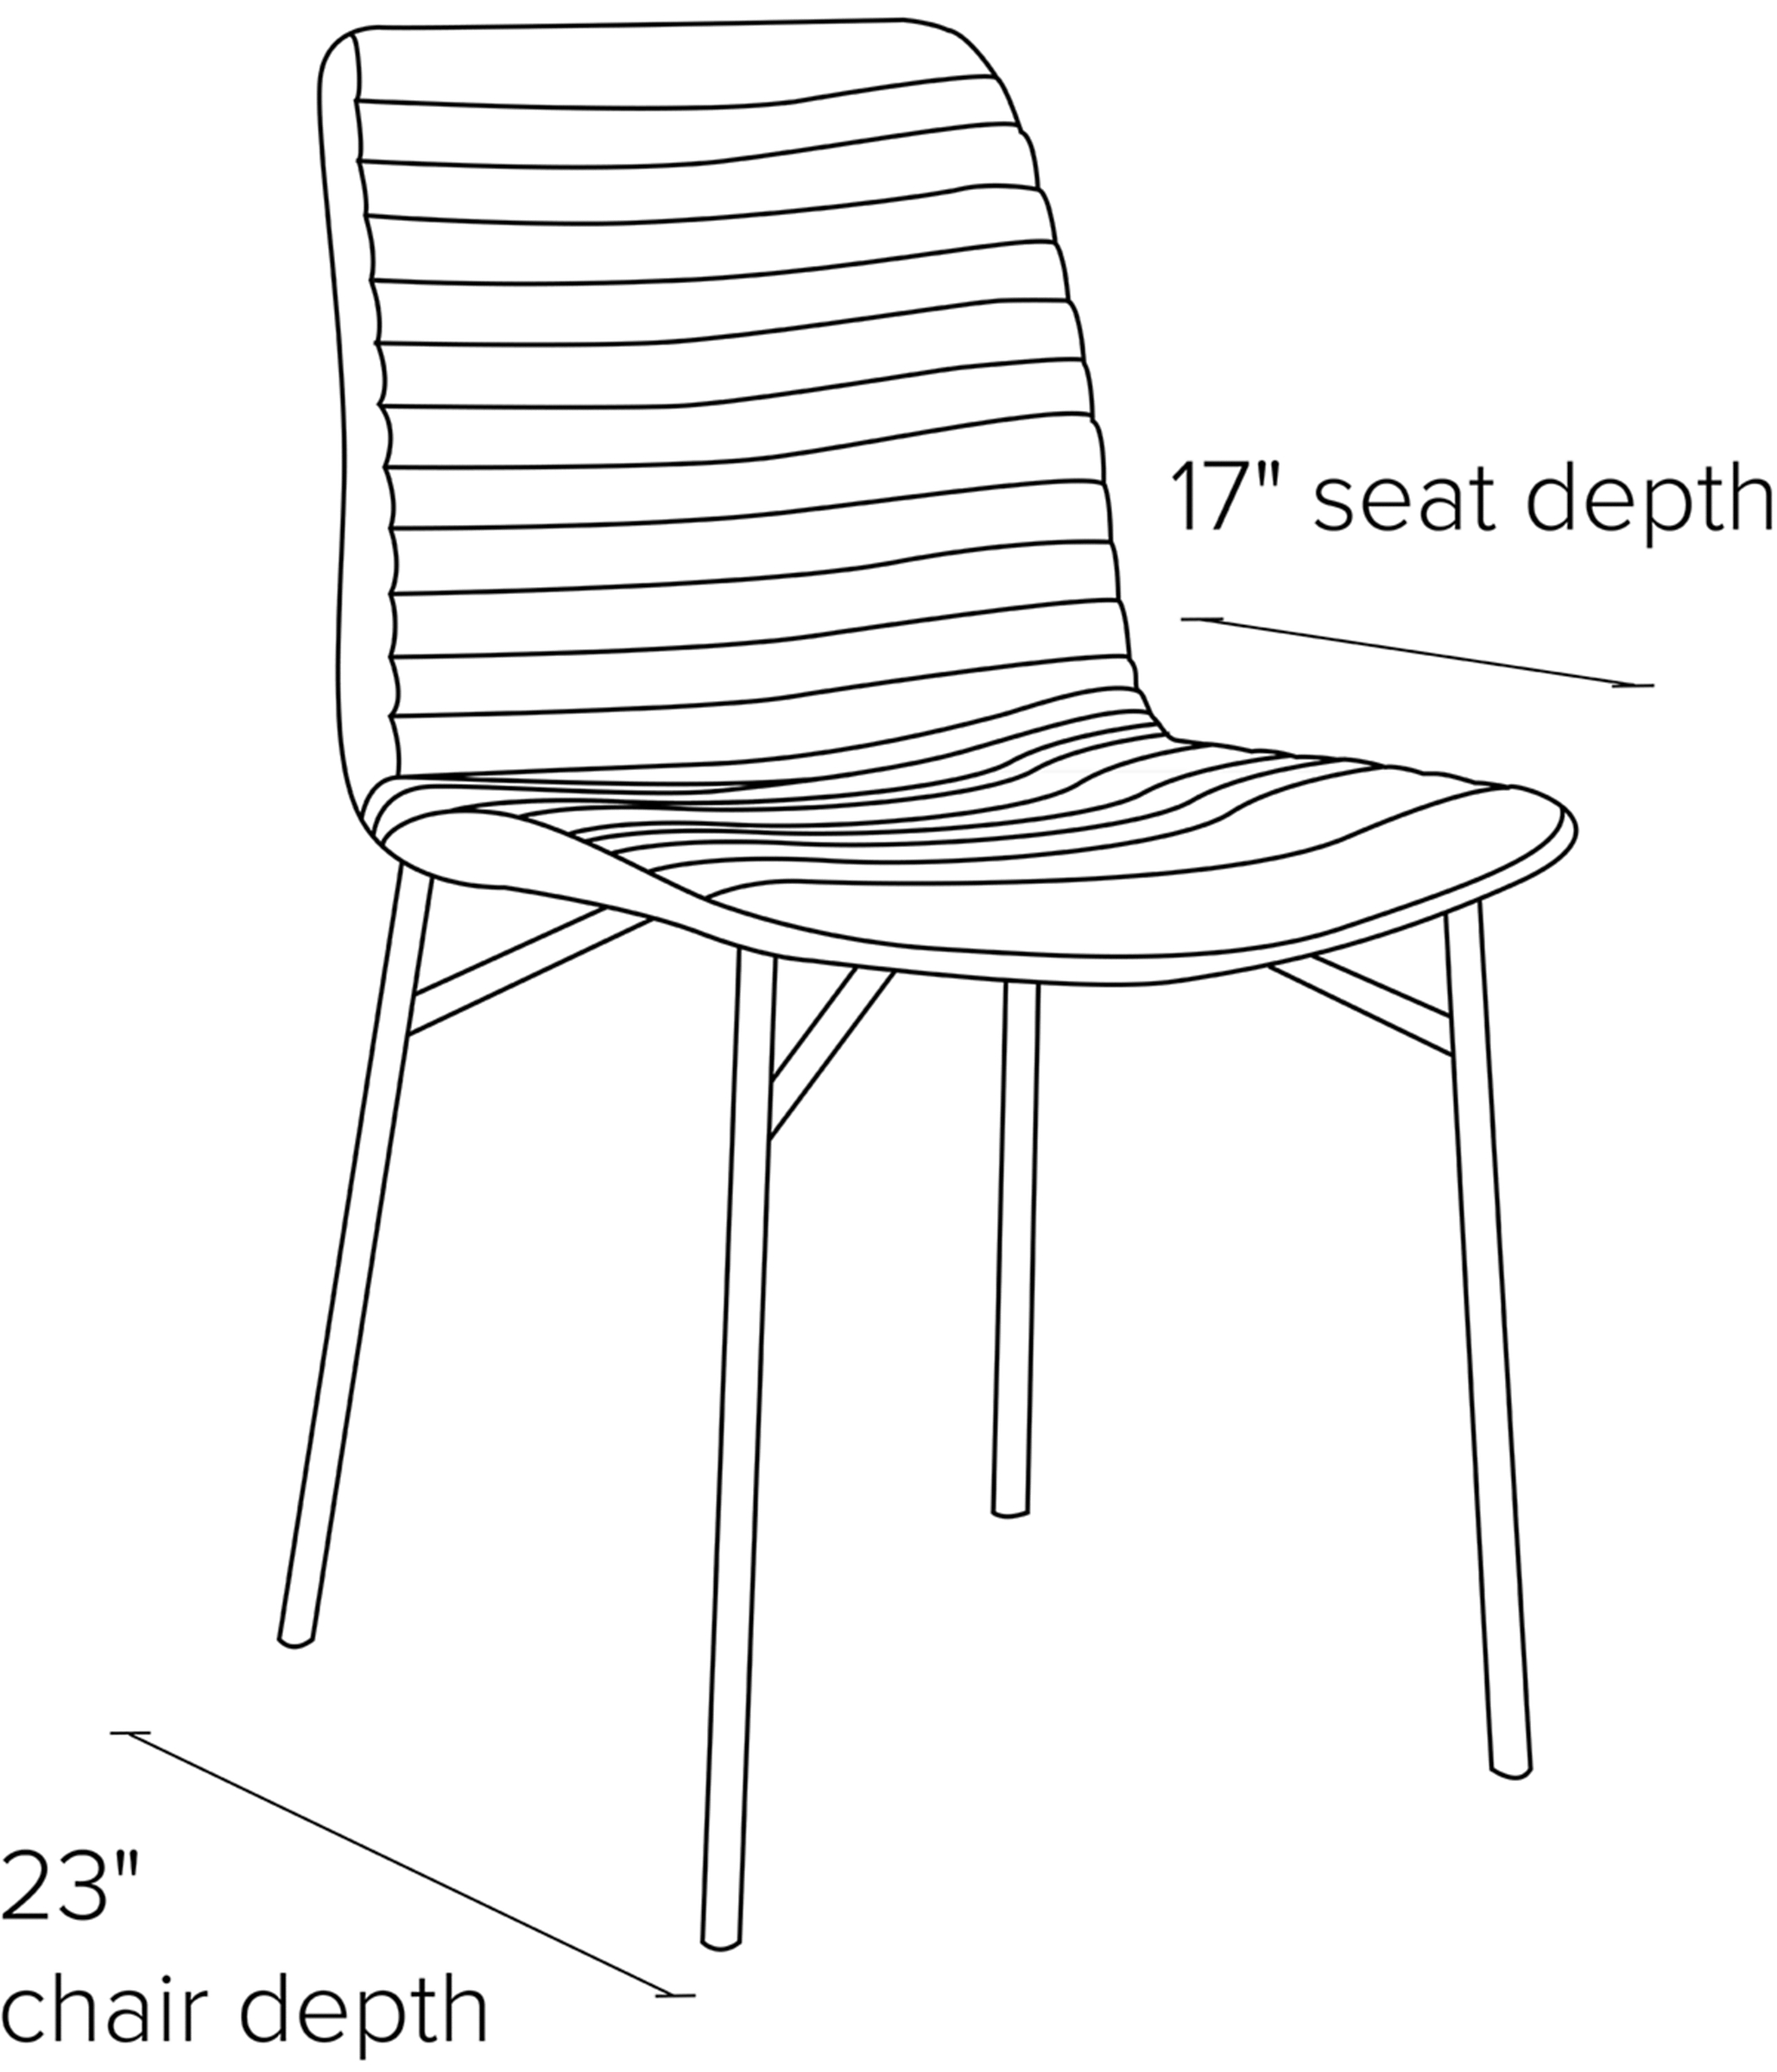 Side view dimension illustration of Cato side chair.